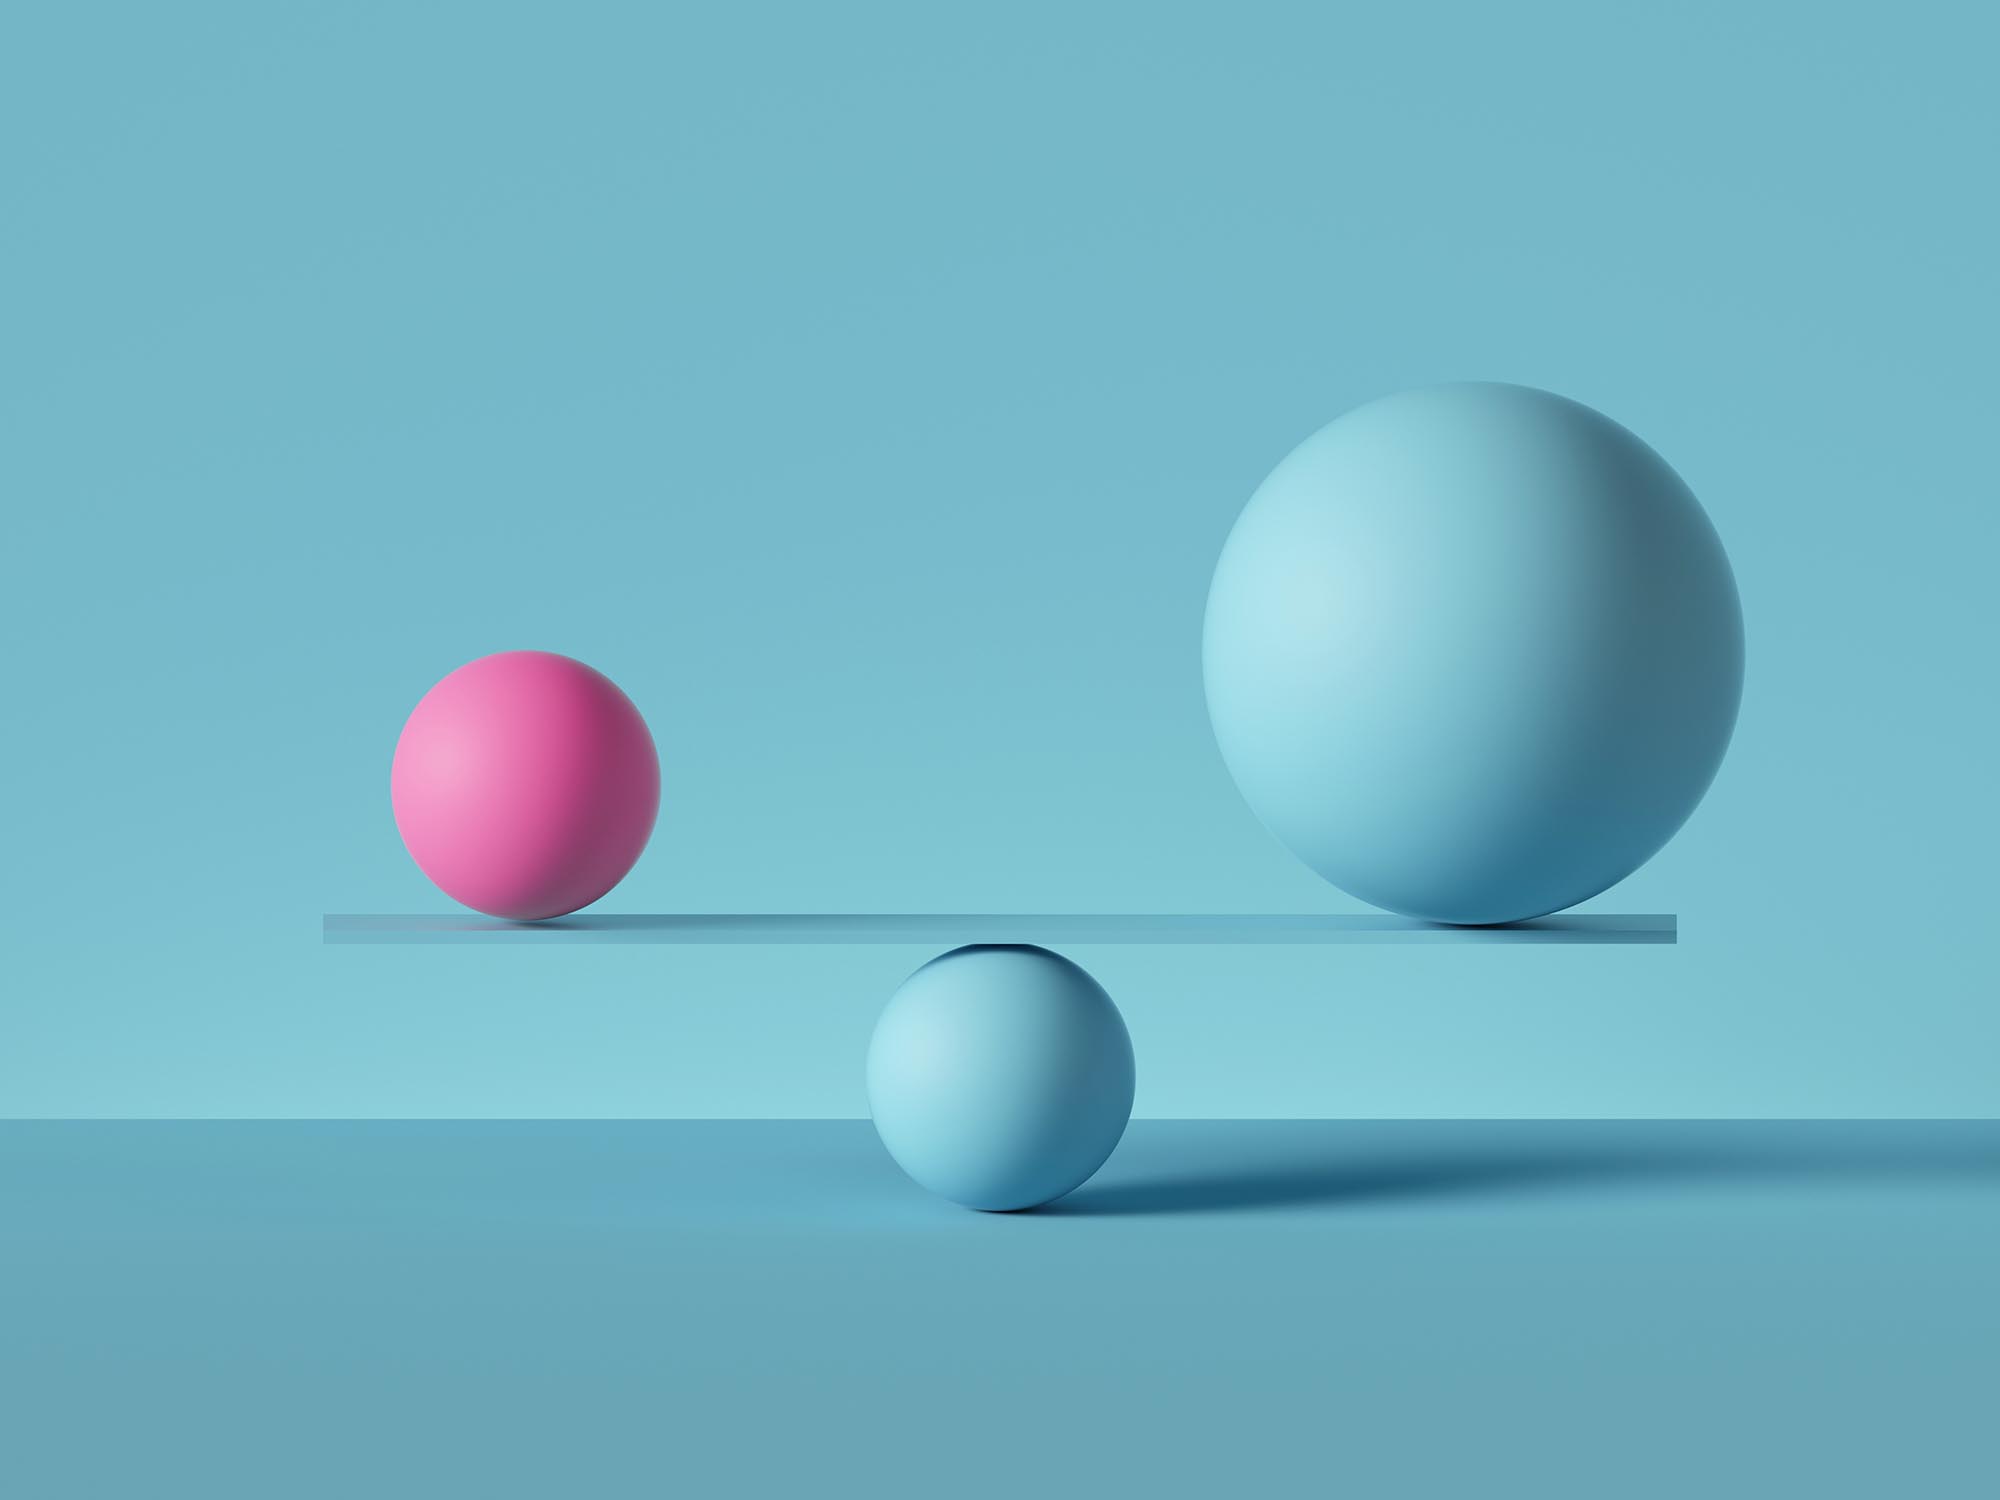 balancing blue and pink balls placed on scales or weigher, isolated on blue background